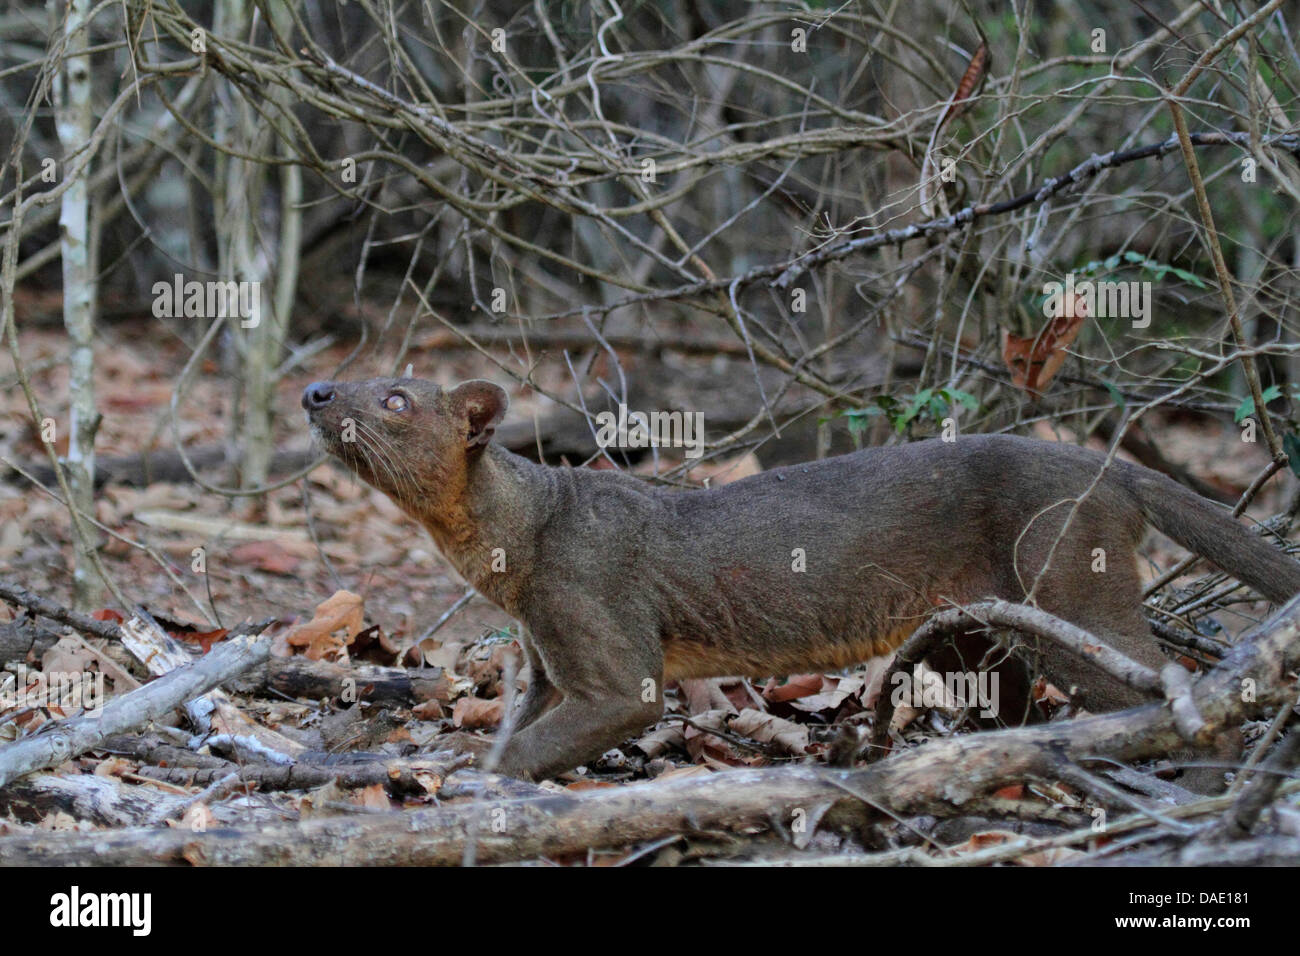 fossa (Cryptoprocta ferox), fossa is prawling and sniffing the air, Madagascar, Toliara, Kirindy Forest Stock Photo